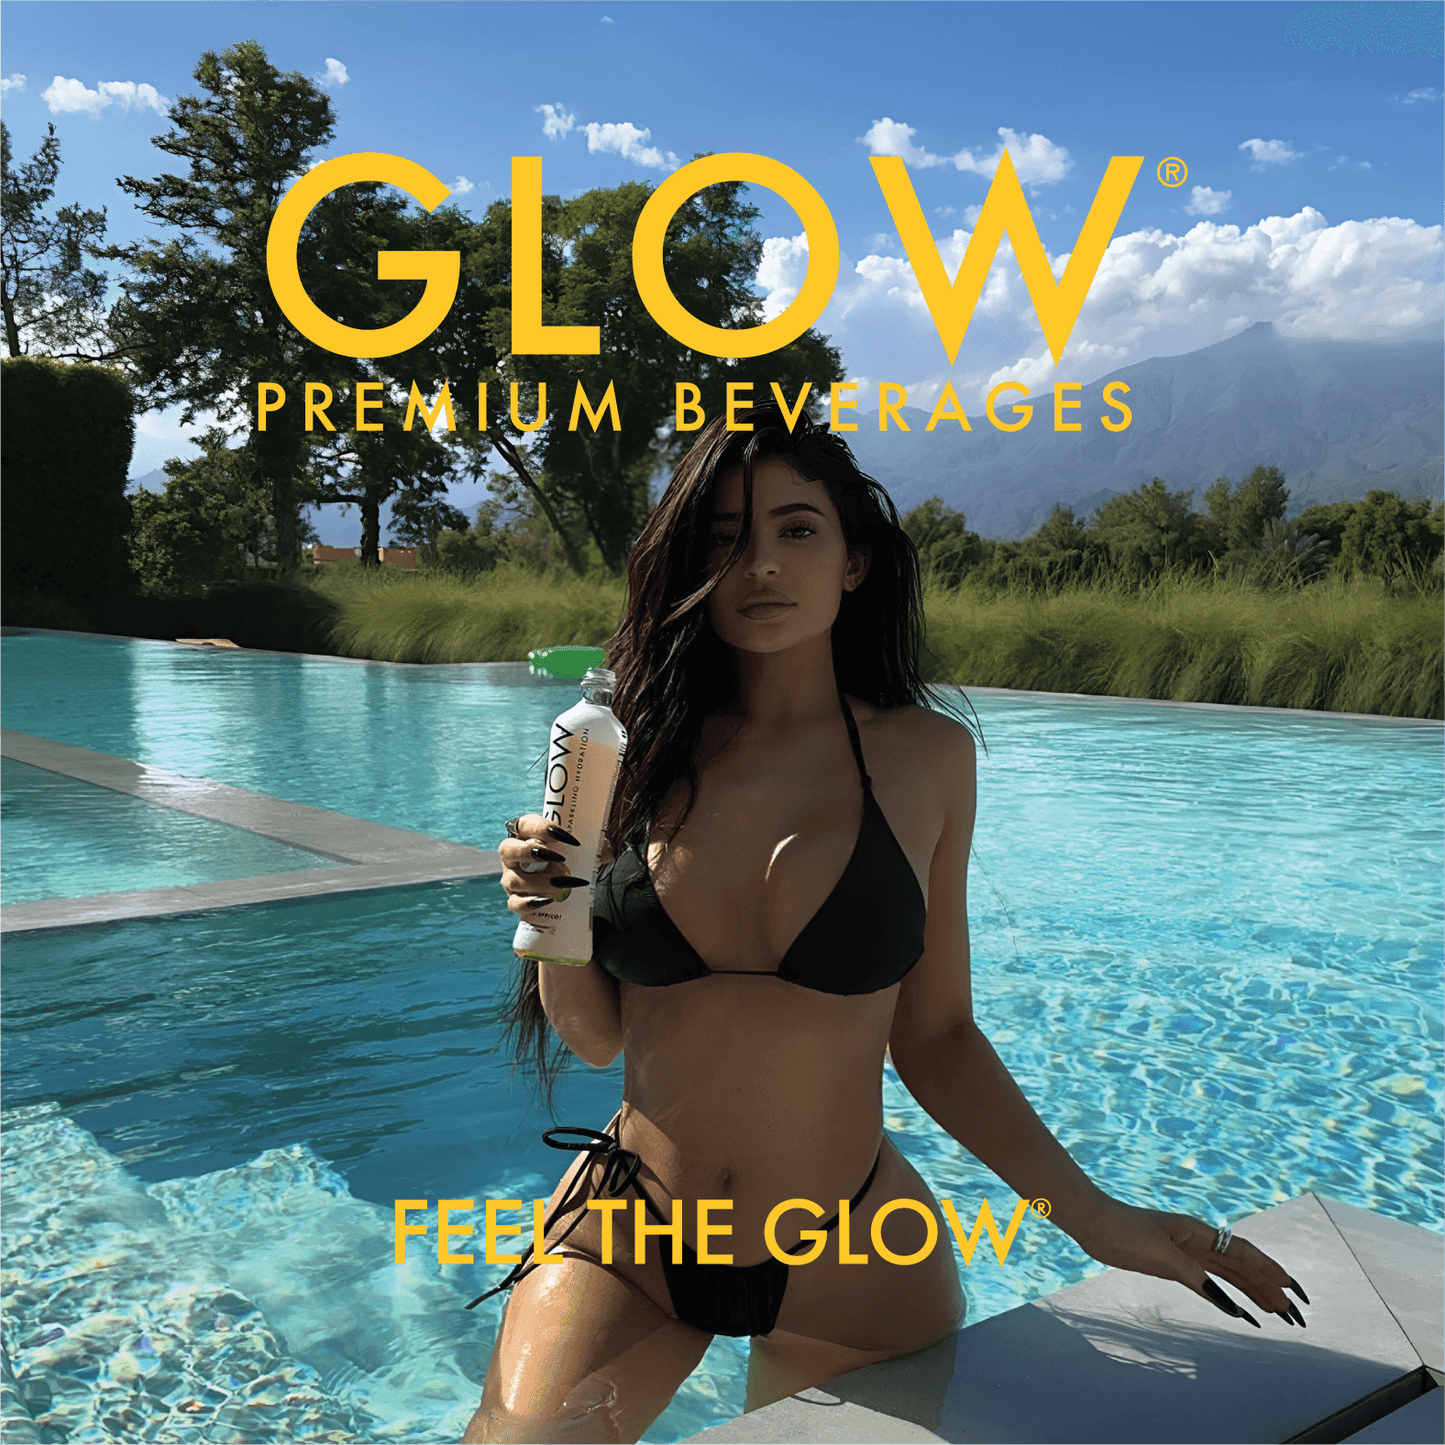 GLOW Sparkling Hydration Kylie Jenner Exclusive - Mango Apricot - Extreme Snacks